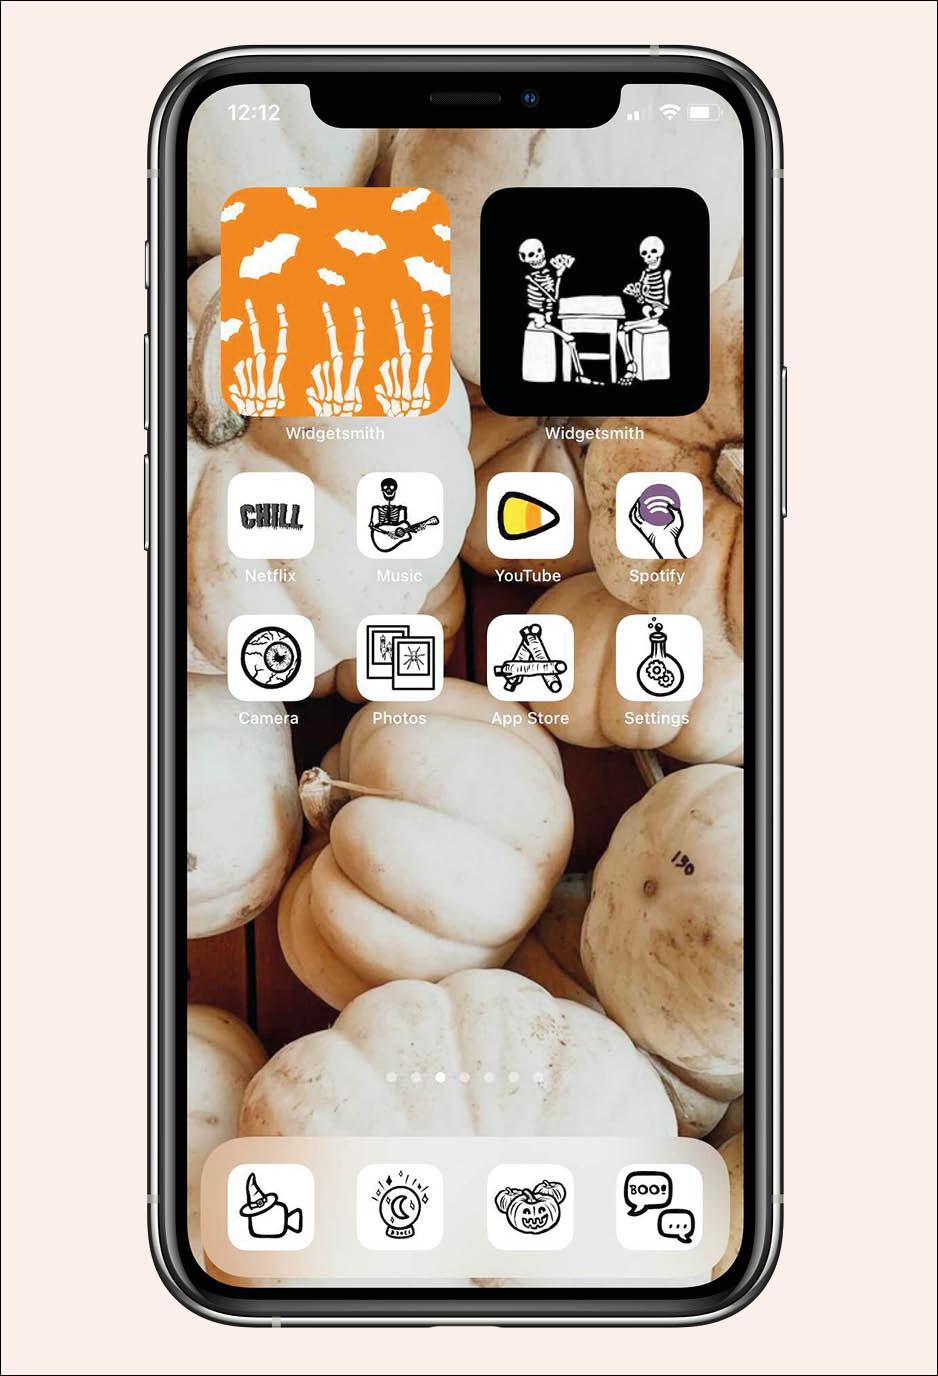 halloween inspired ios icon pack with pumpkins as the background with spooky widgets and apps